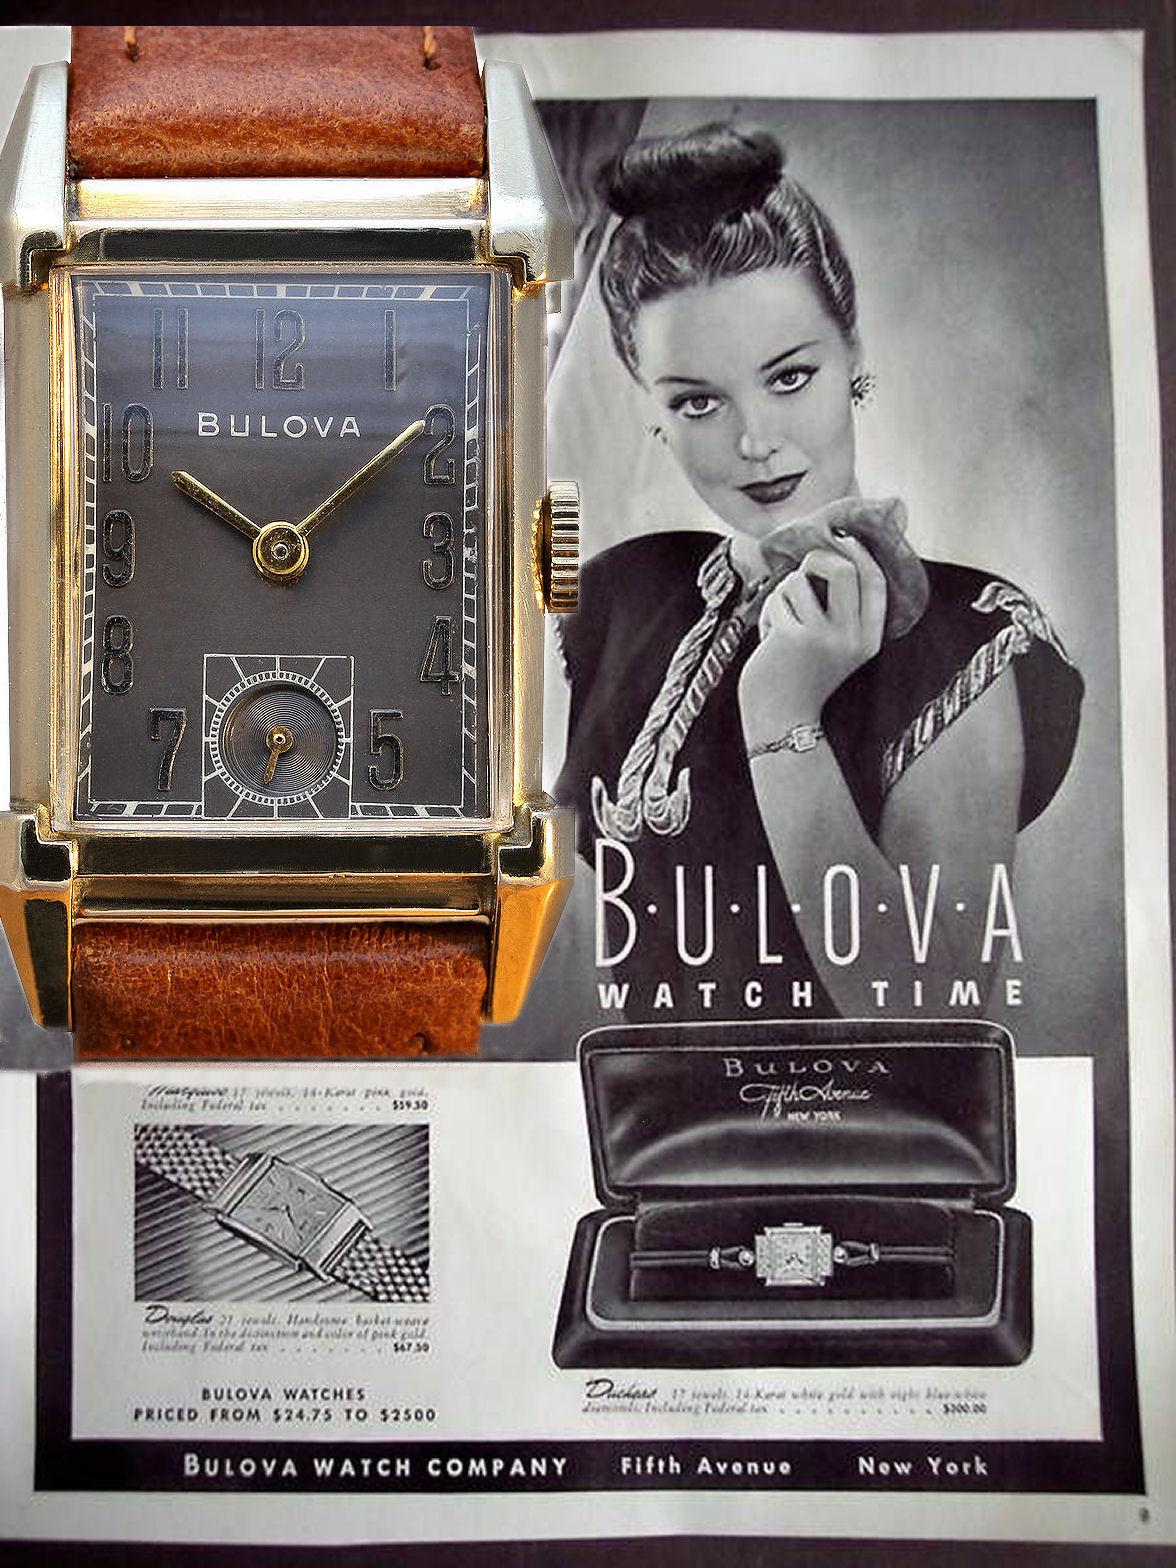 Fabulous opportunity to acquire this wonderful gents manual wrist watch dating to 1947 and made by the US watch company Bulova. This particular model was named 'His Excellency' and is a little rarer in design because of the black dial, the casing is